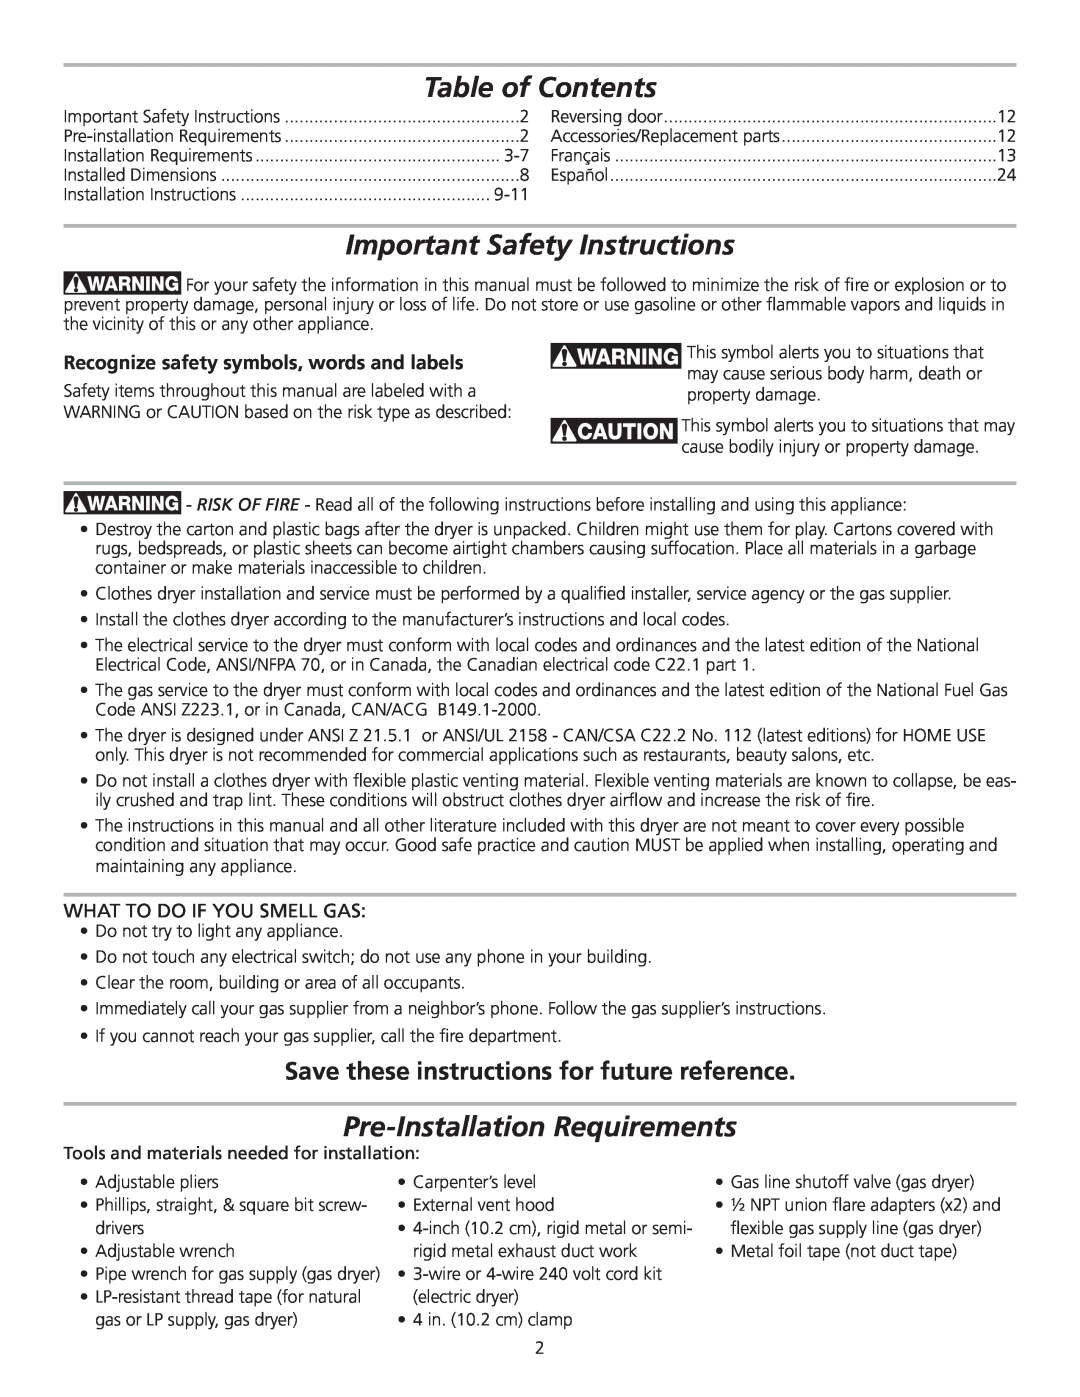 Frigidaire 137153700B Table of Contents, Important Safety Instructions, Pre-Installation Requirements 